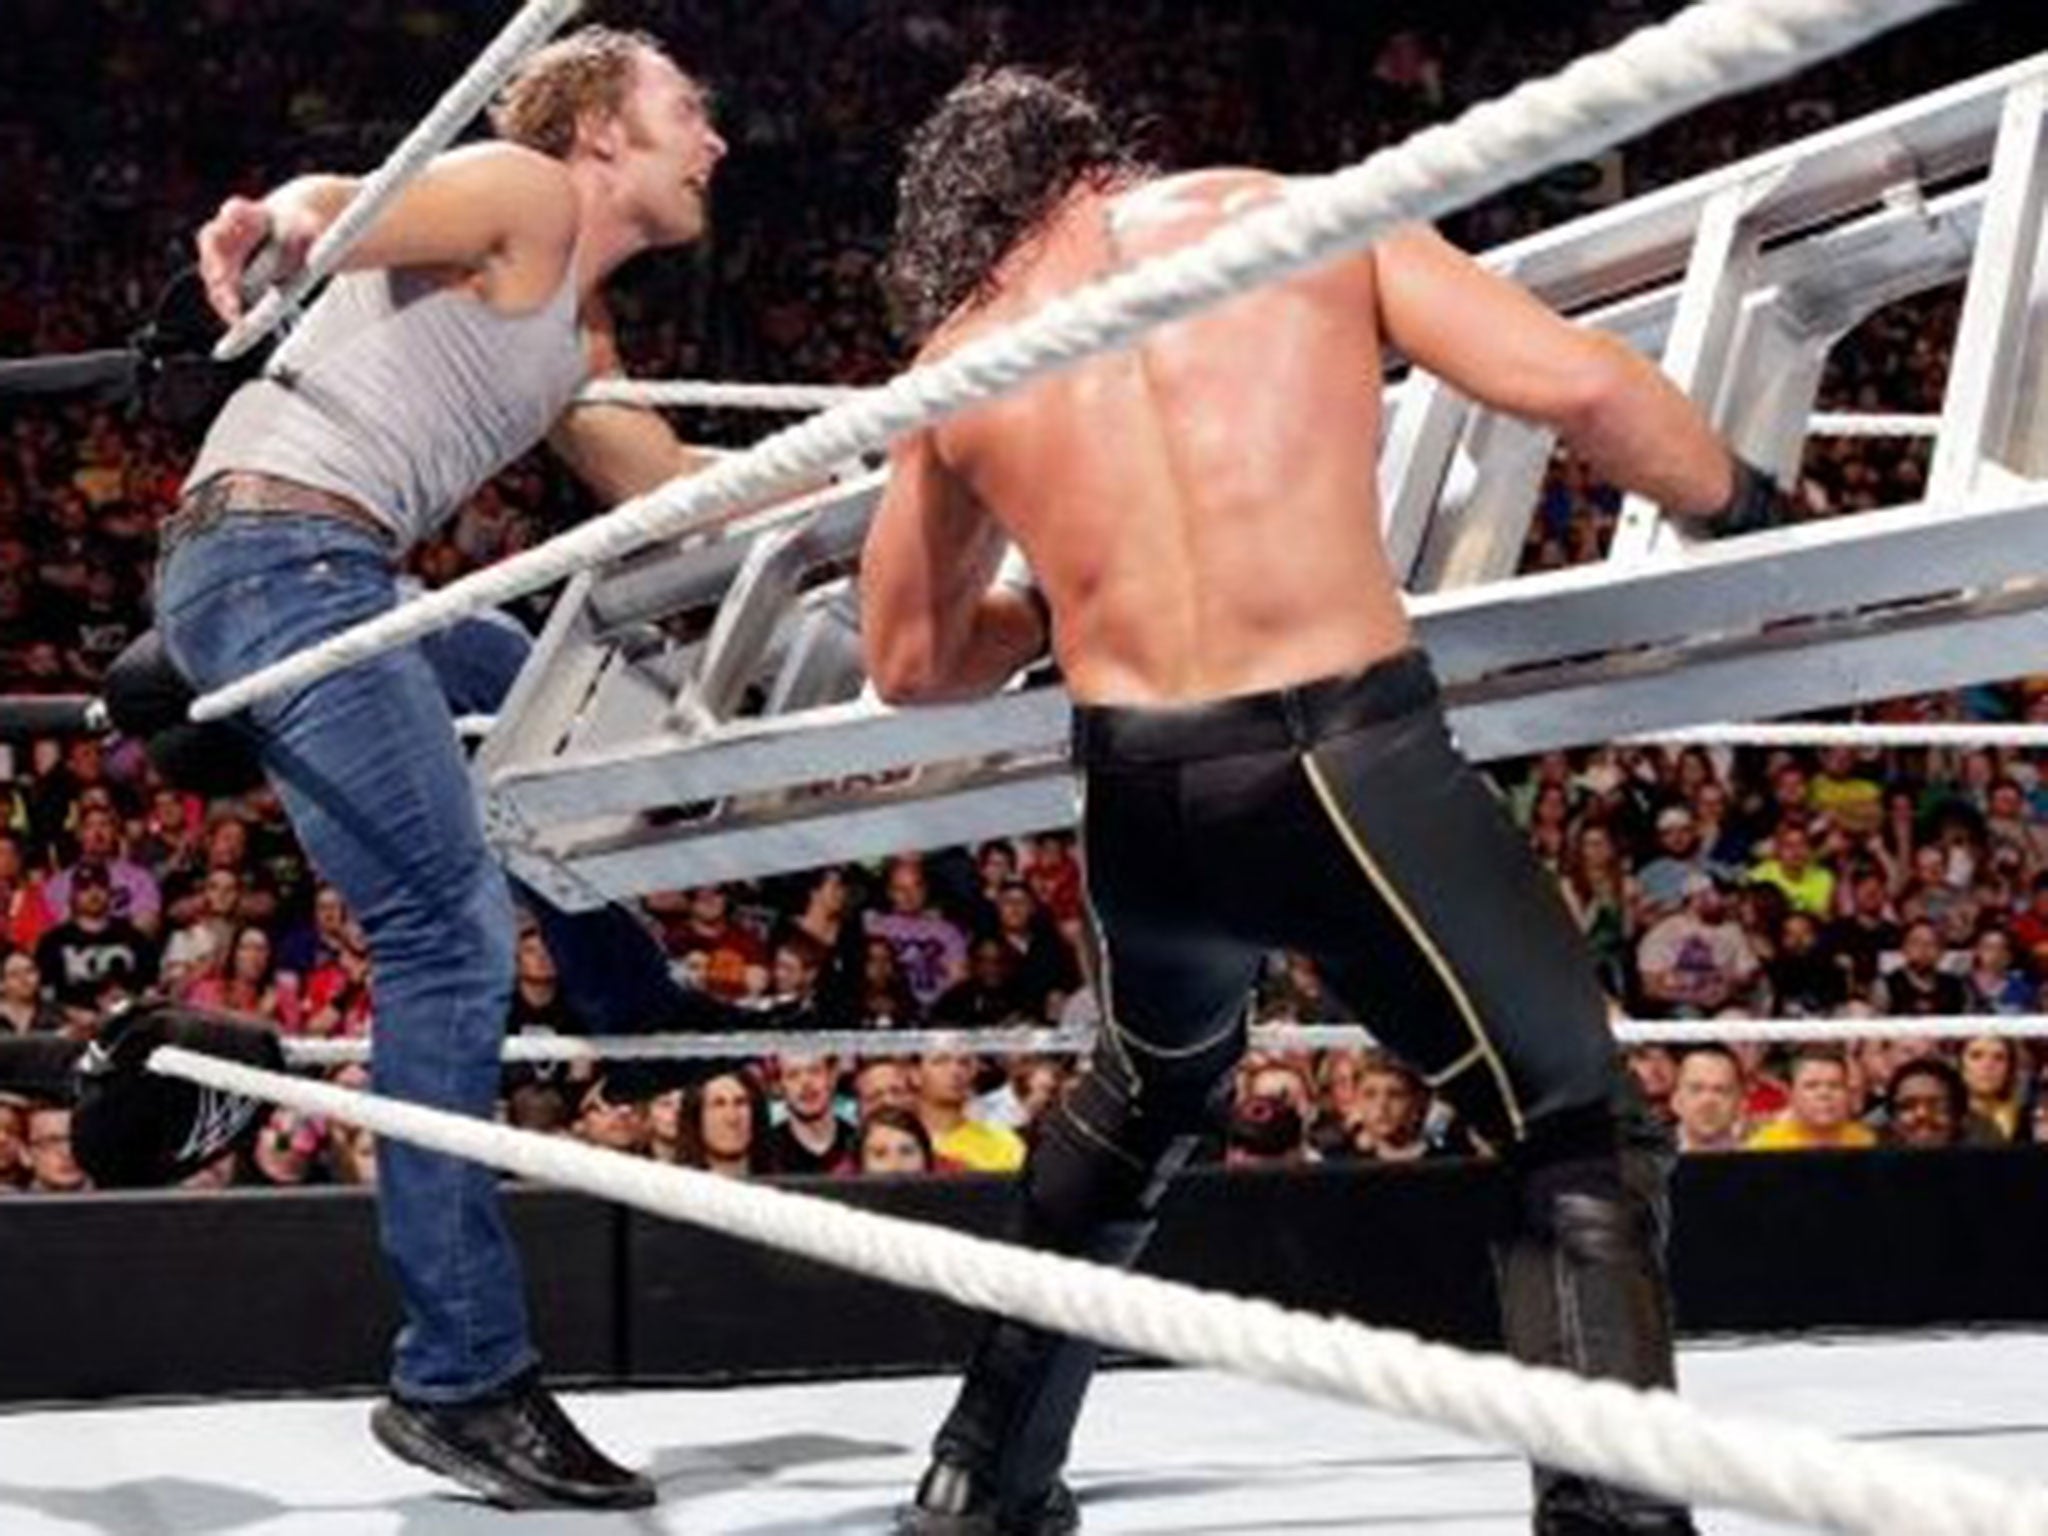 Seth Rollins strikes Dean Ambrose with the ladder